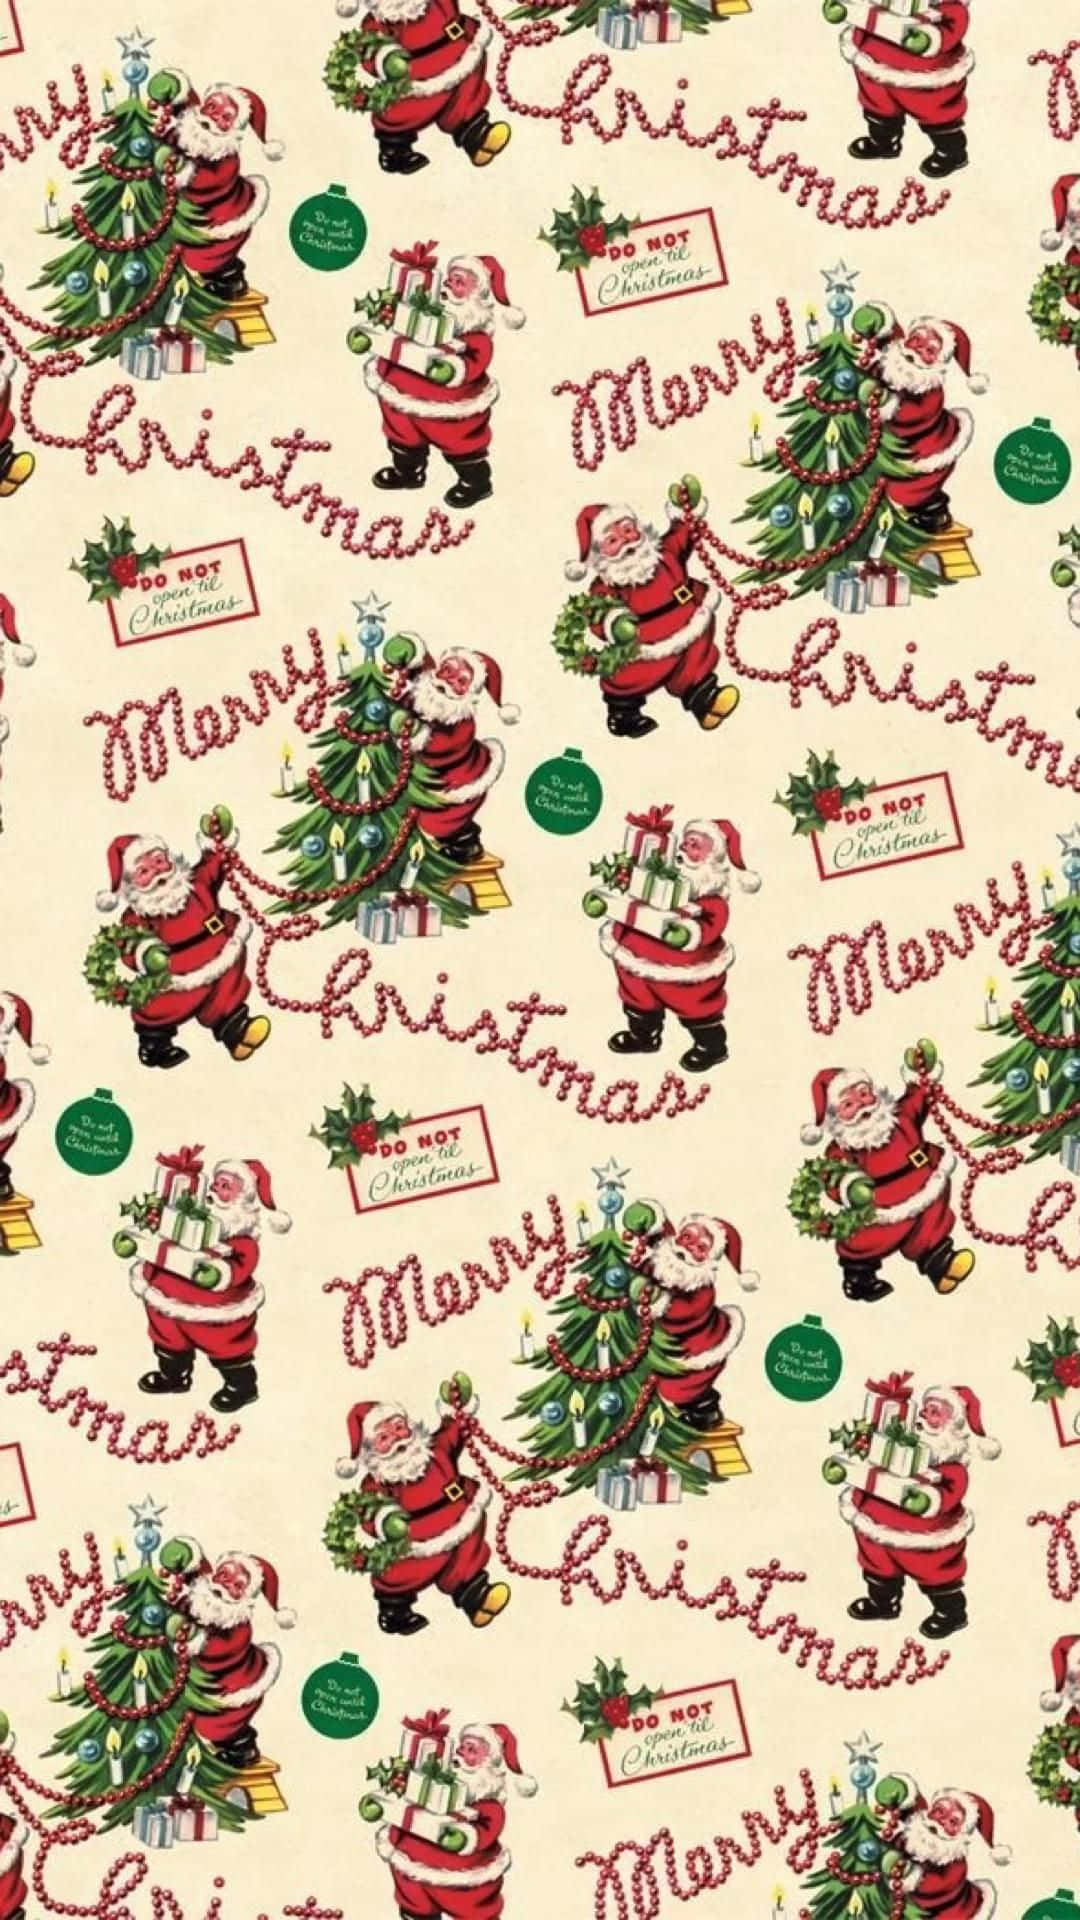 35 Free Vintage Christmas Wallpaper Options For iPhone  Christmas phone  wallpaper Cute christmas wallpaper Wallpaper iphone christmas